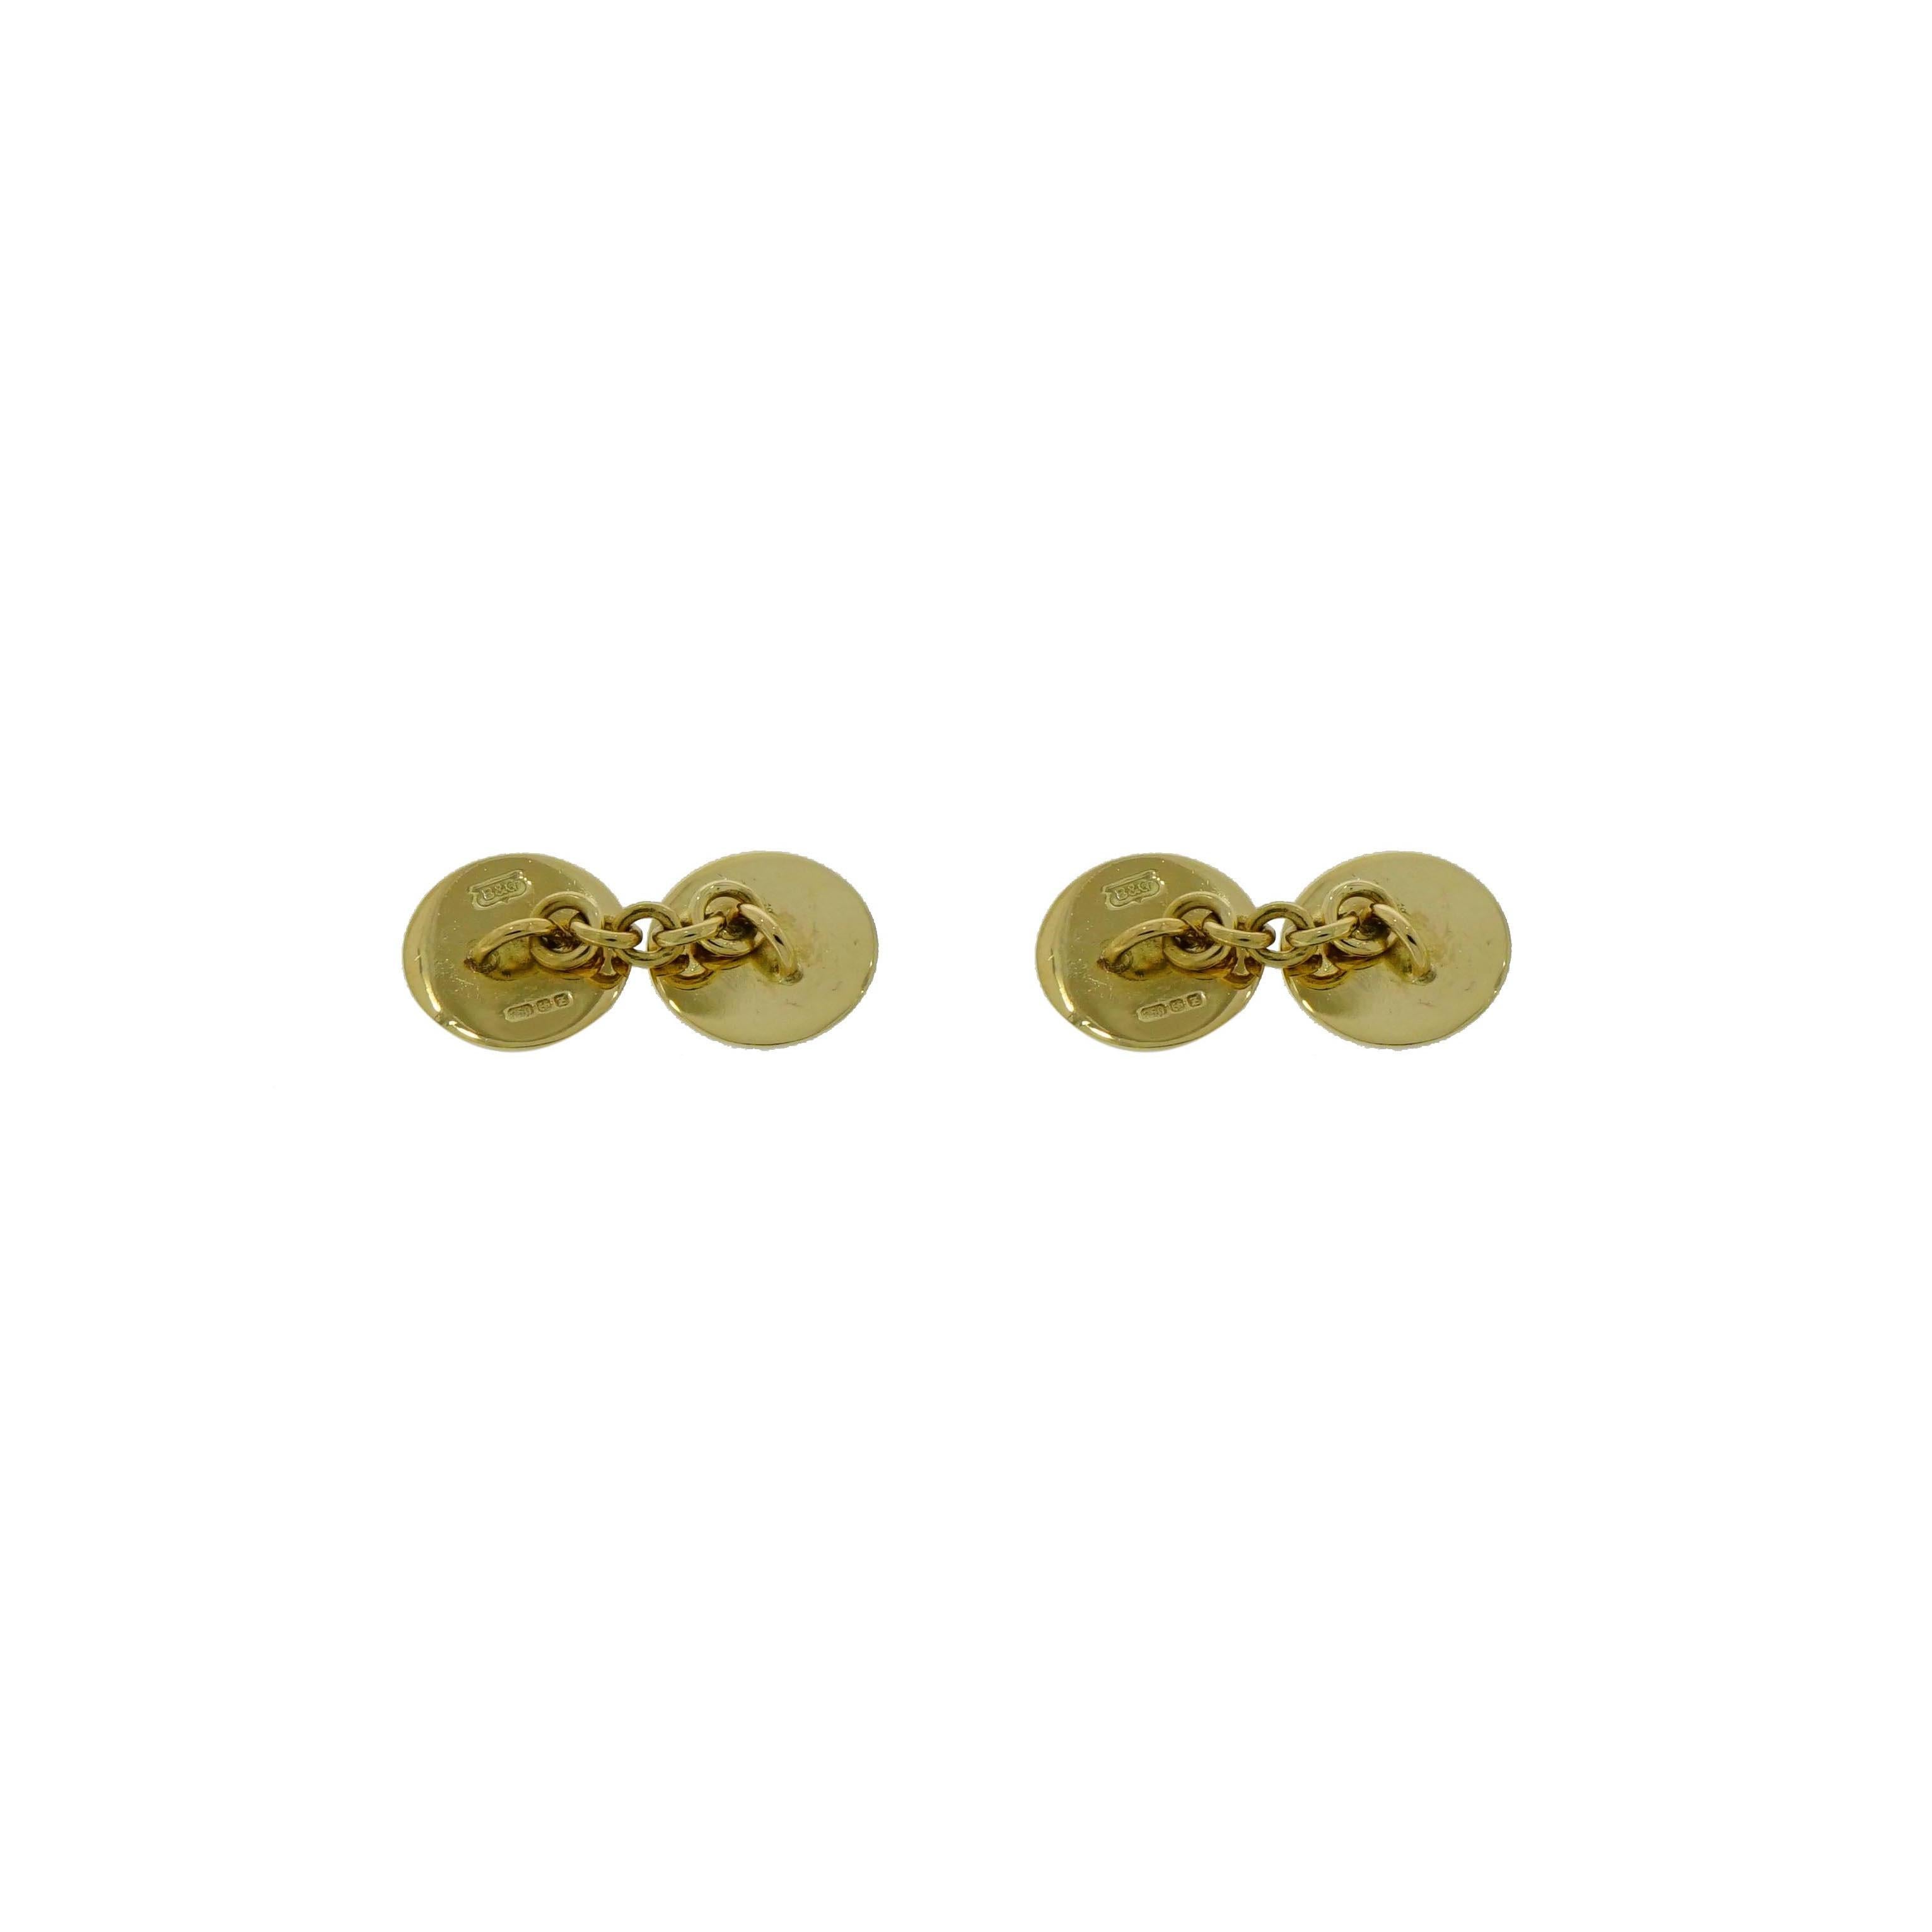 This gorgeous pair of cufflinks is crafted in 18k yellow gold by Brixton & Gill.
Features a beautiful red enamel that is framed by a line of deep blue contrasting with the yellow gold.
Measures 14mm in diameter. 